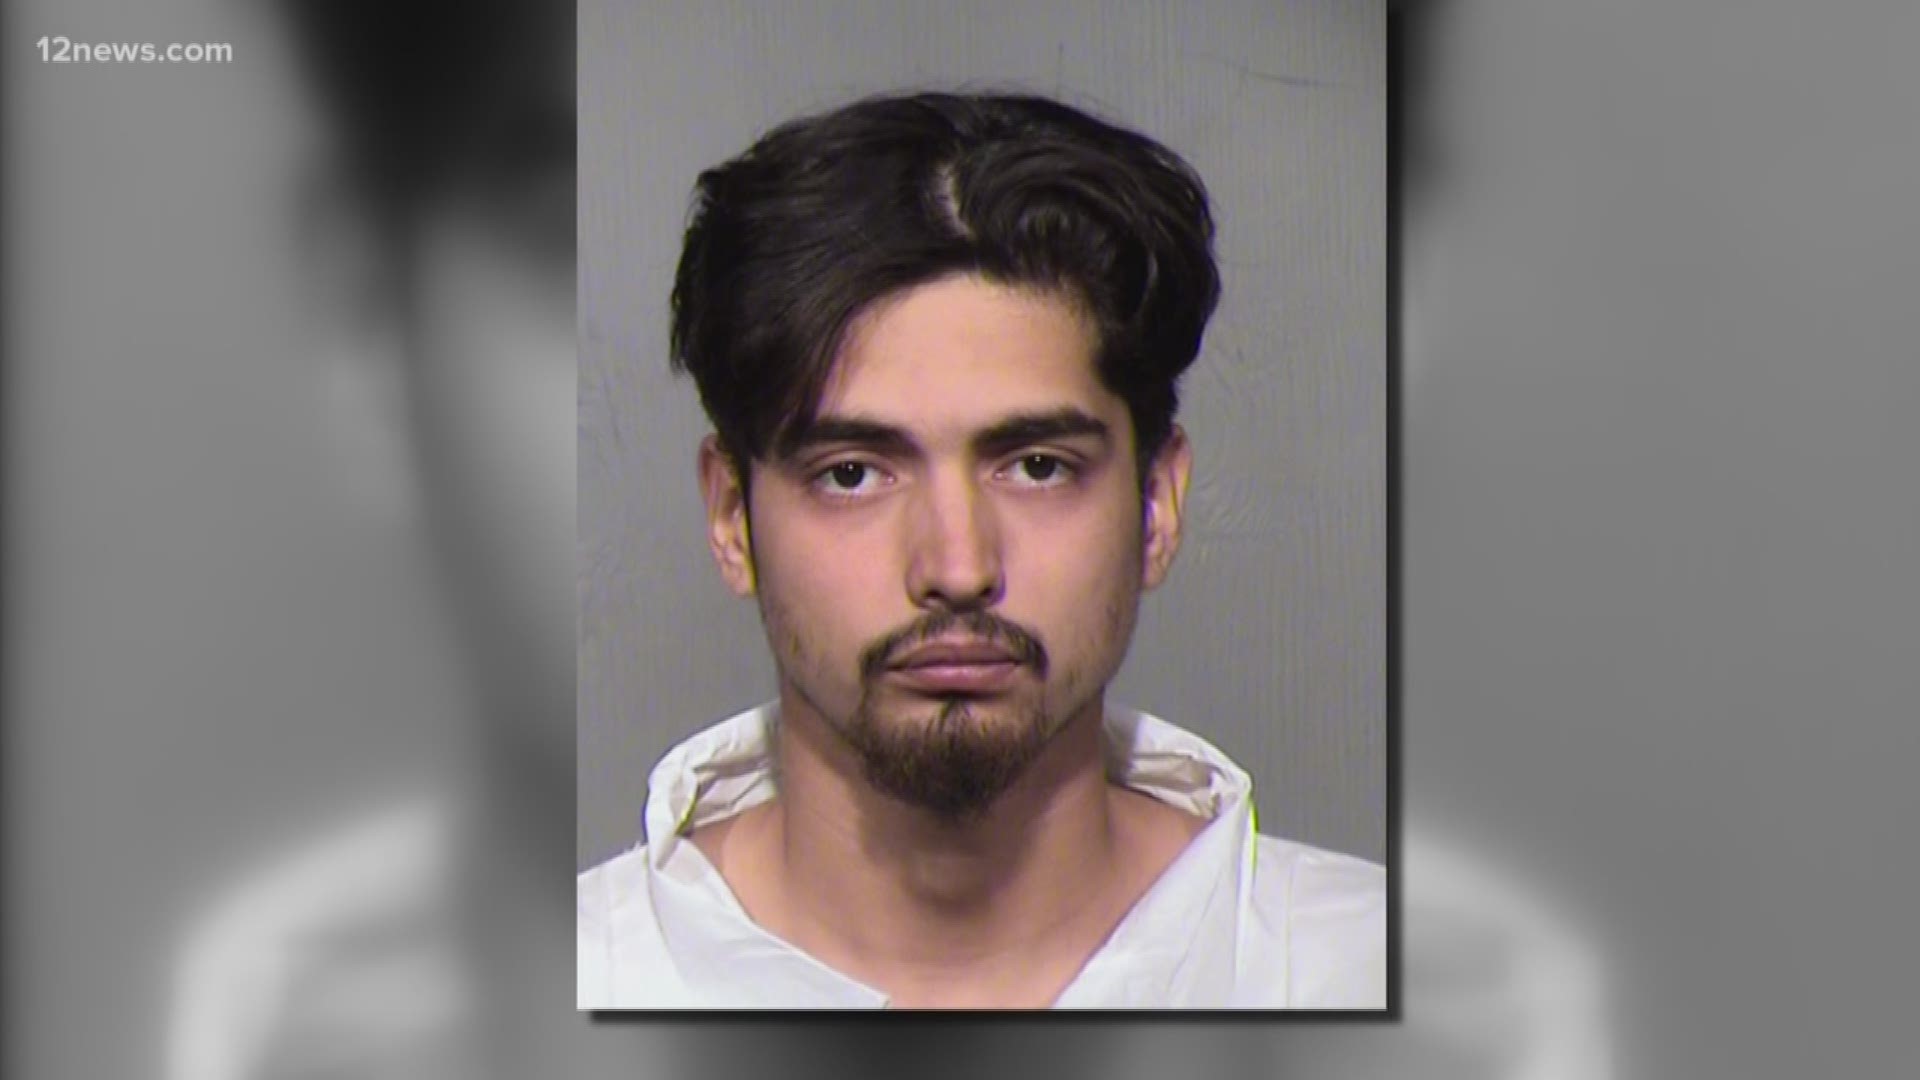 22-year-old Daddy Alexander Felix turned himself in Monday in connection with a deadly road rage shooting in Glendale. An 18-year-old died after the situation escalated after a driver through something at another car.